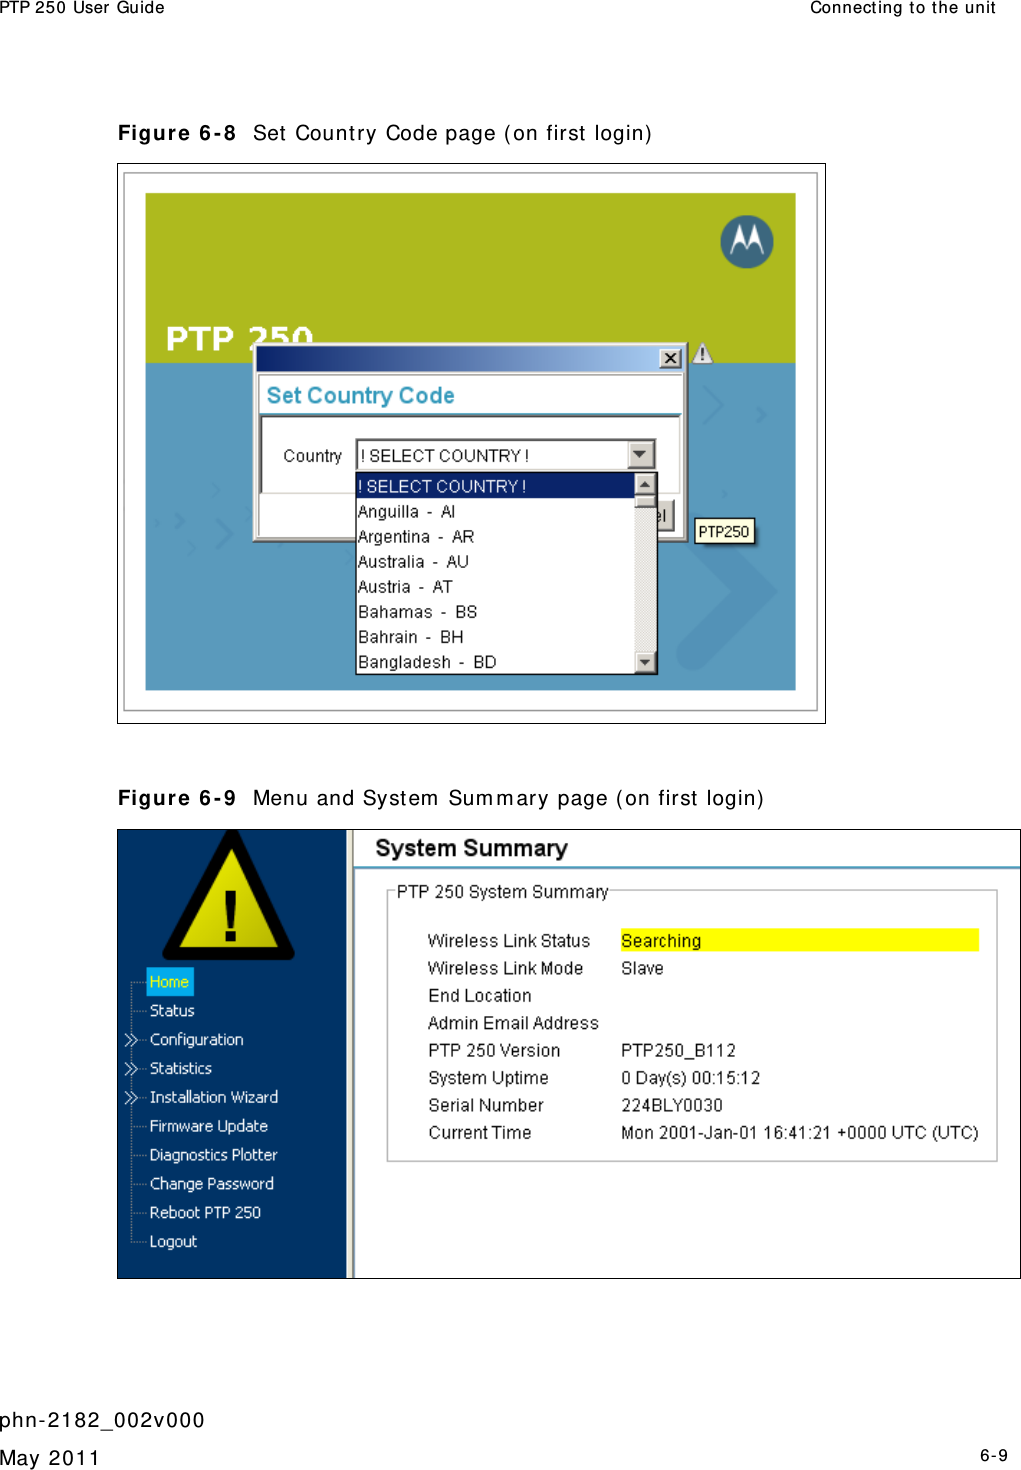 PTP 250 User Guide  Connect ing to t he unit   phn- 2182_002v000   May 2011   6-9  Figure 6 - 8   Set  Count ry Code page ( on first  login)    Figure 6 - 9   Menu and Syst em  Sum m ary page ( on first  login)     